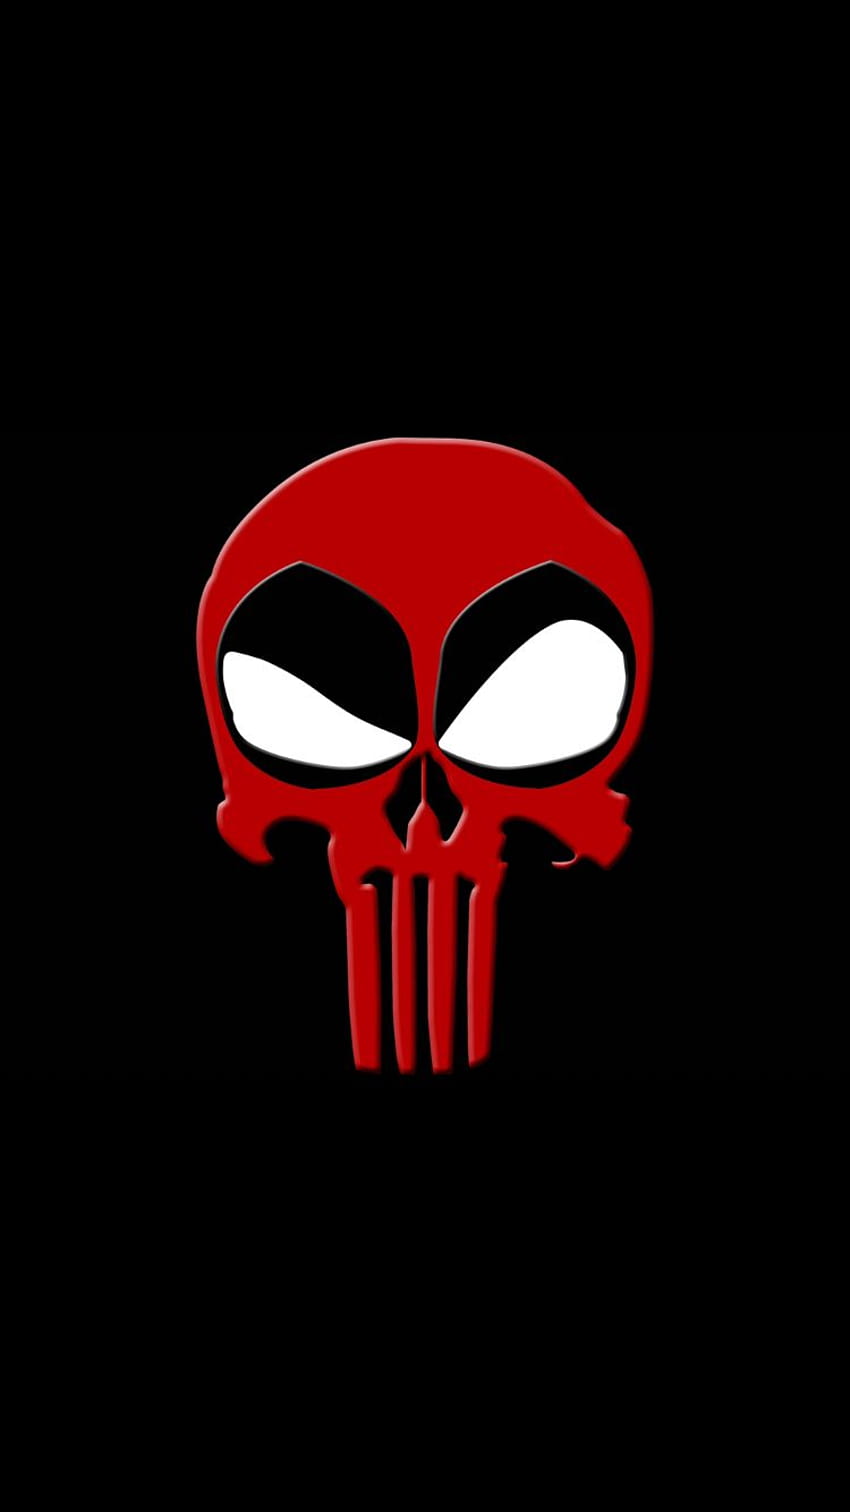 Punisher and Deadpool Logo on Dog, scary logo HD phone wallpaper